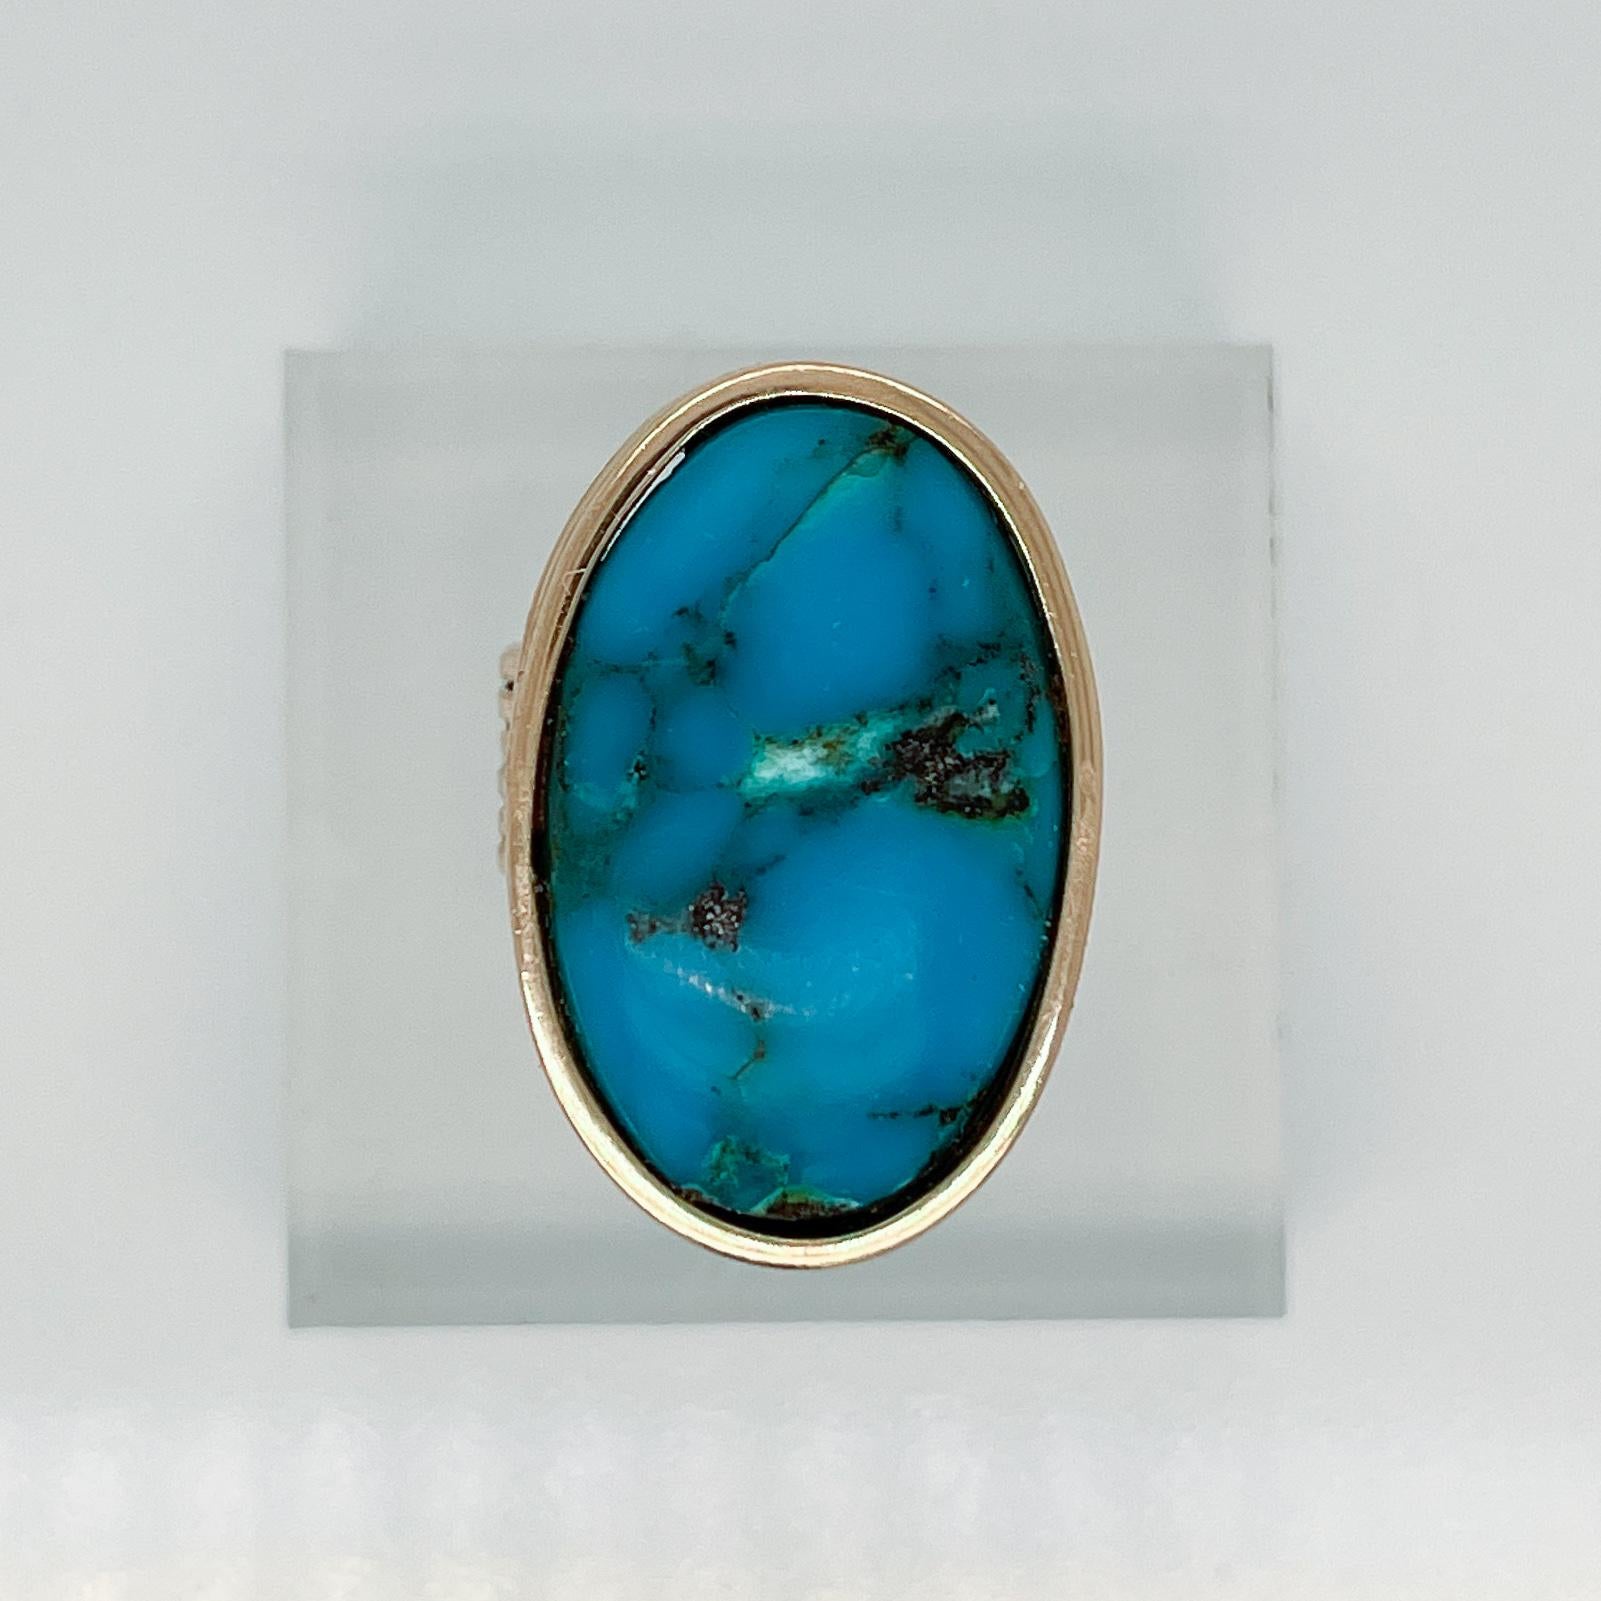 A fine bench made signet type ring.

In 14k gold.

With an oval turquoise cabochon set in a deep bezel setting surmounting a ribbed band.

Simply a wonderful Southwestern ring!

Date:
20th Century

Overall Condition:
It is in overall good,